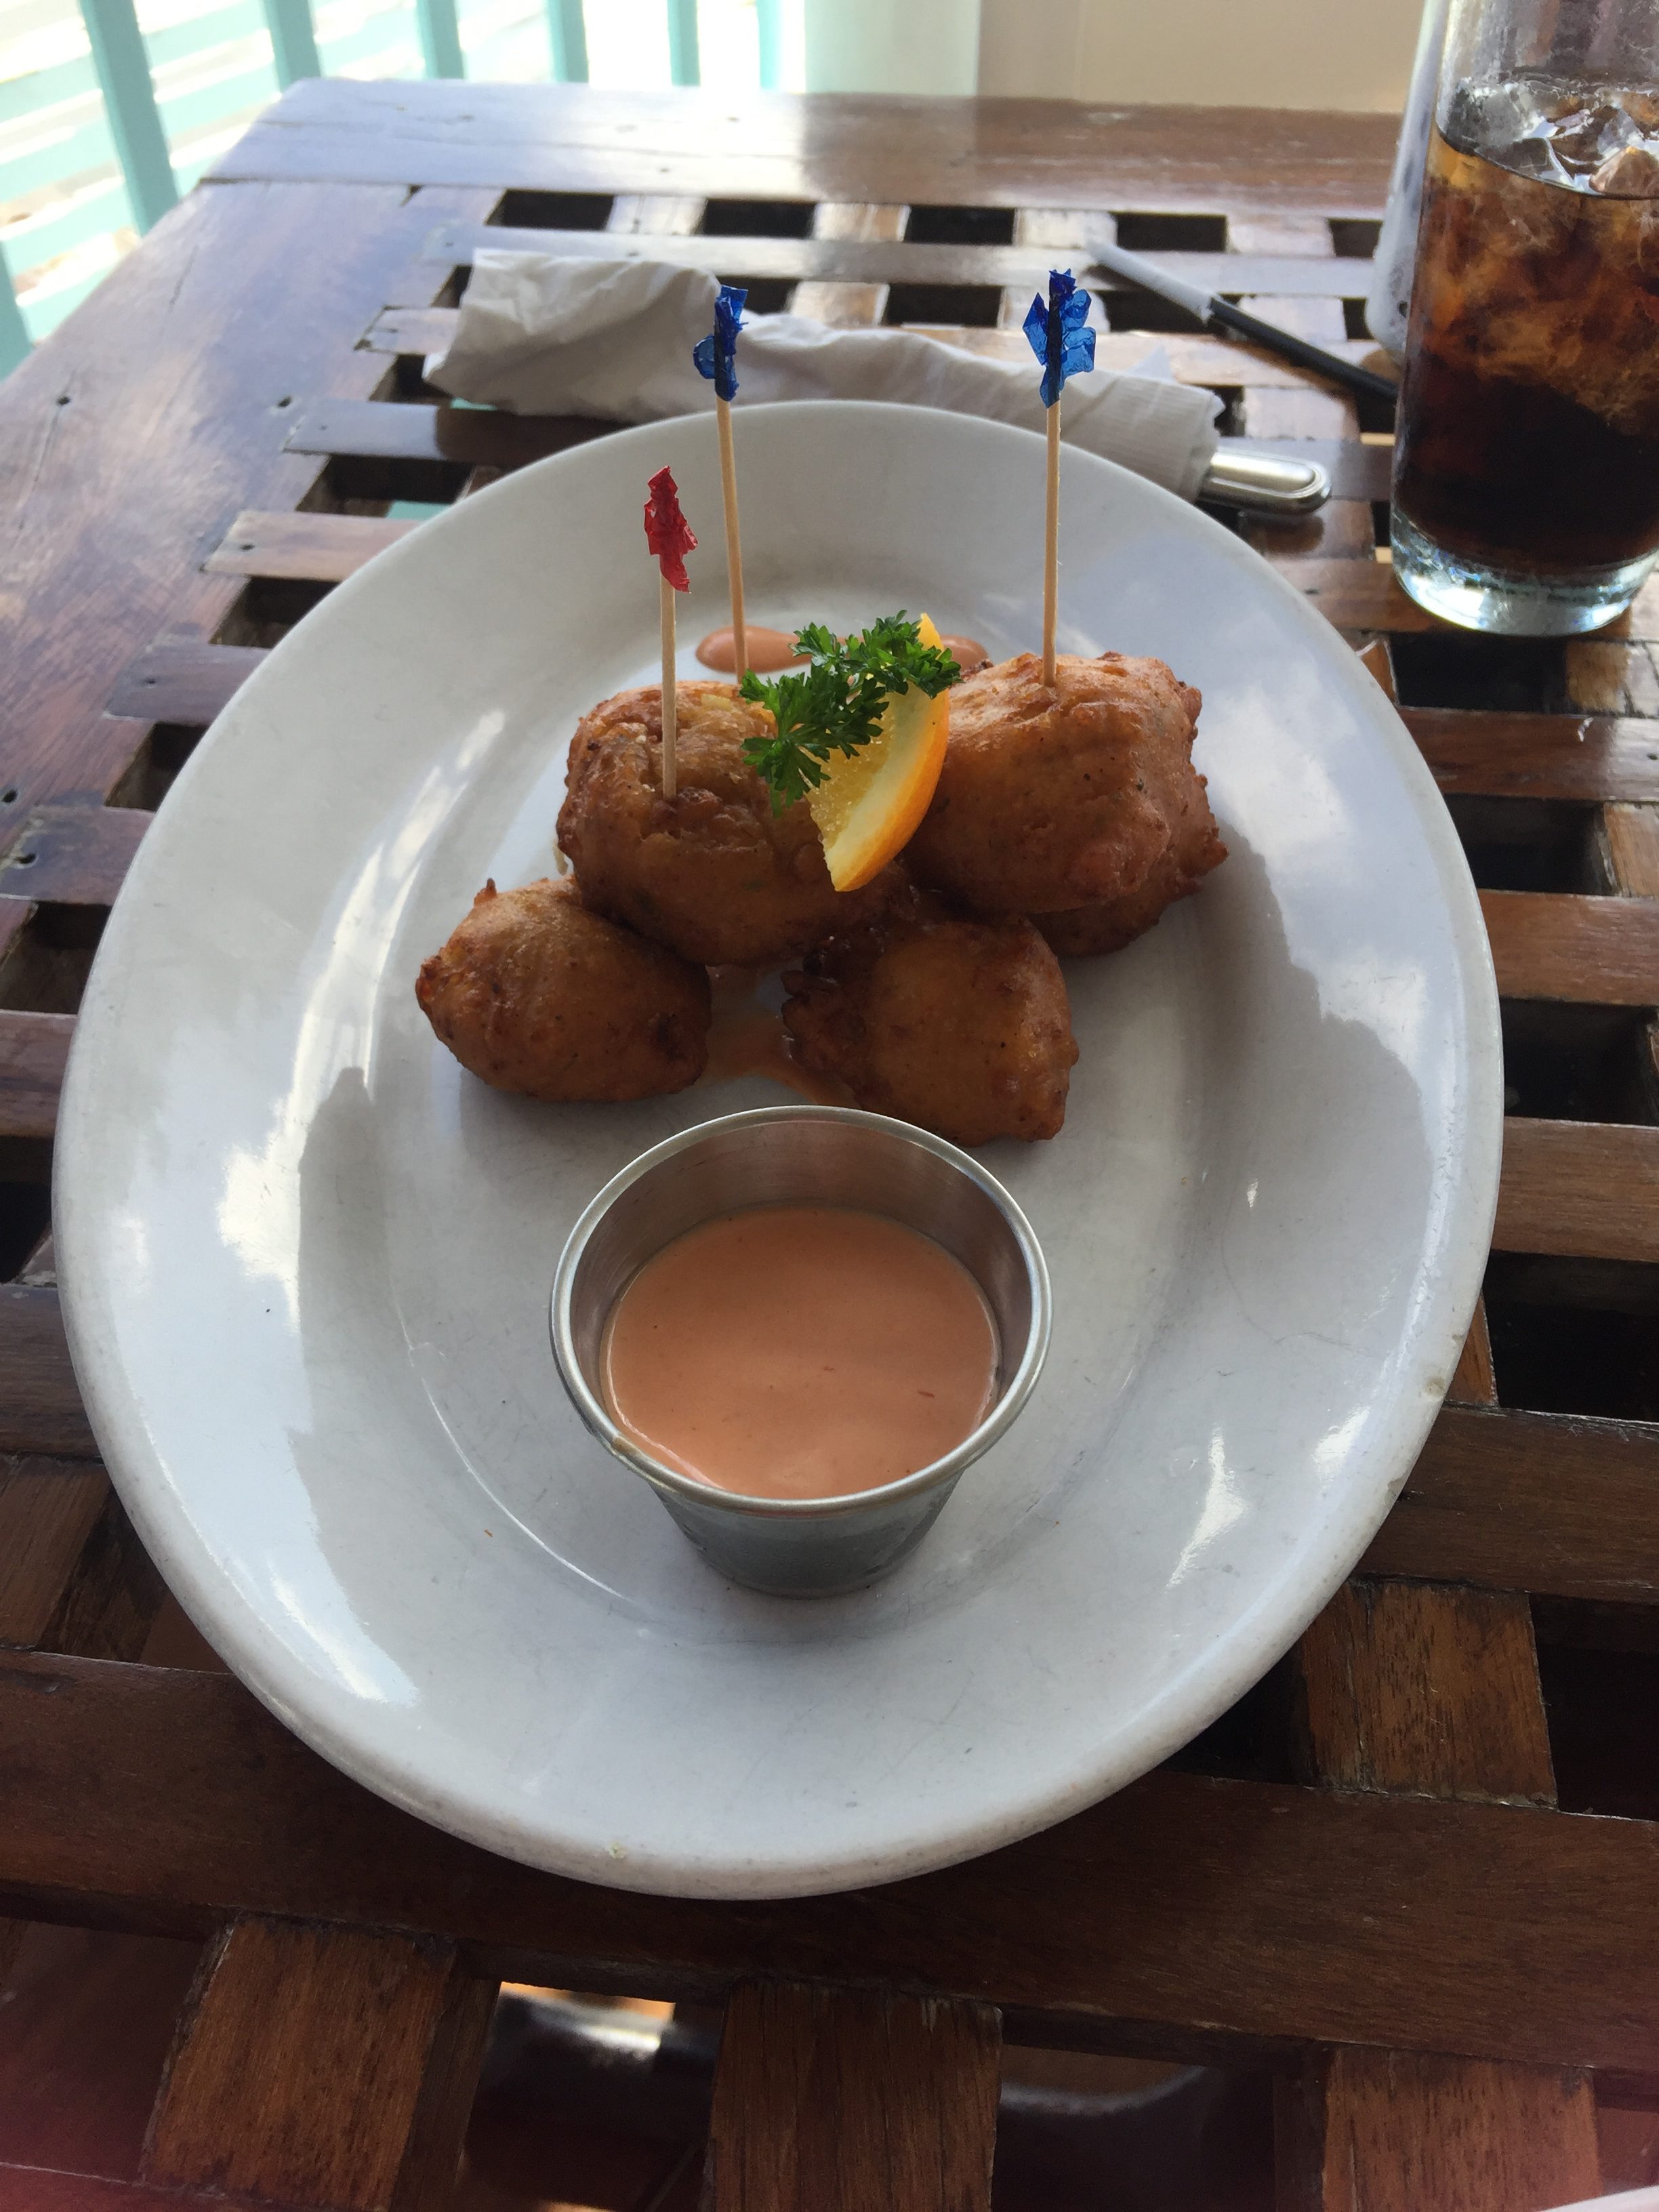 My favorite Bahamian dish, conch fritters